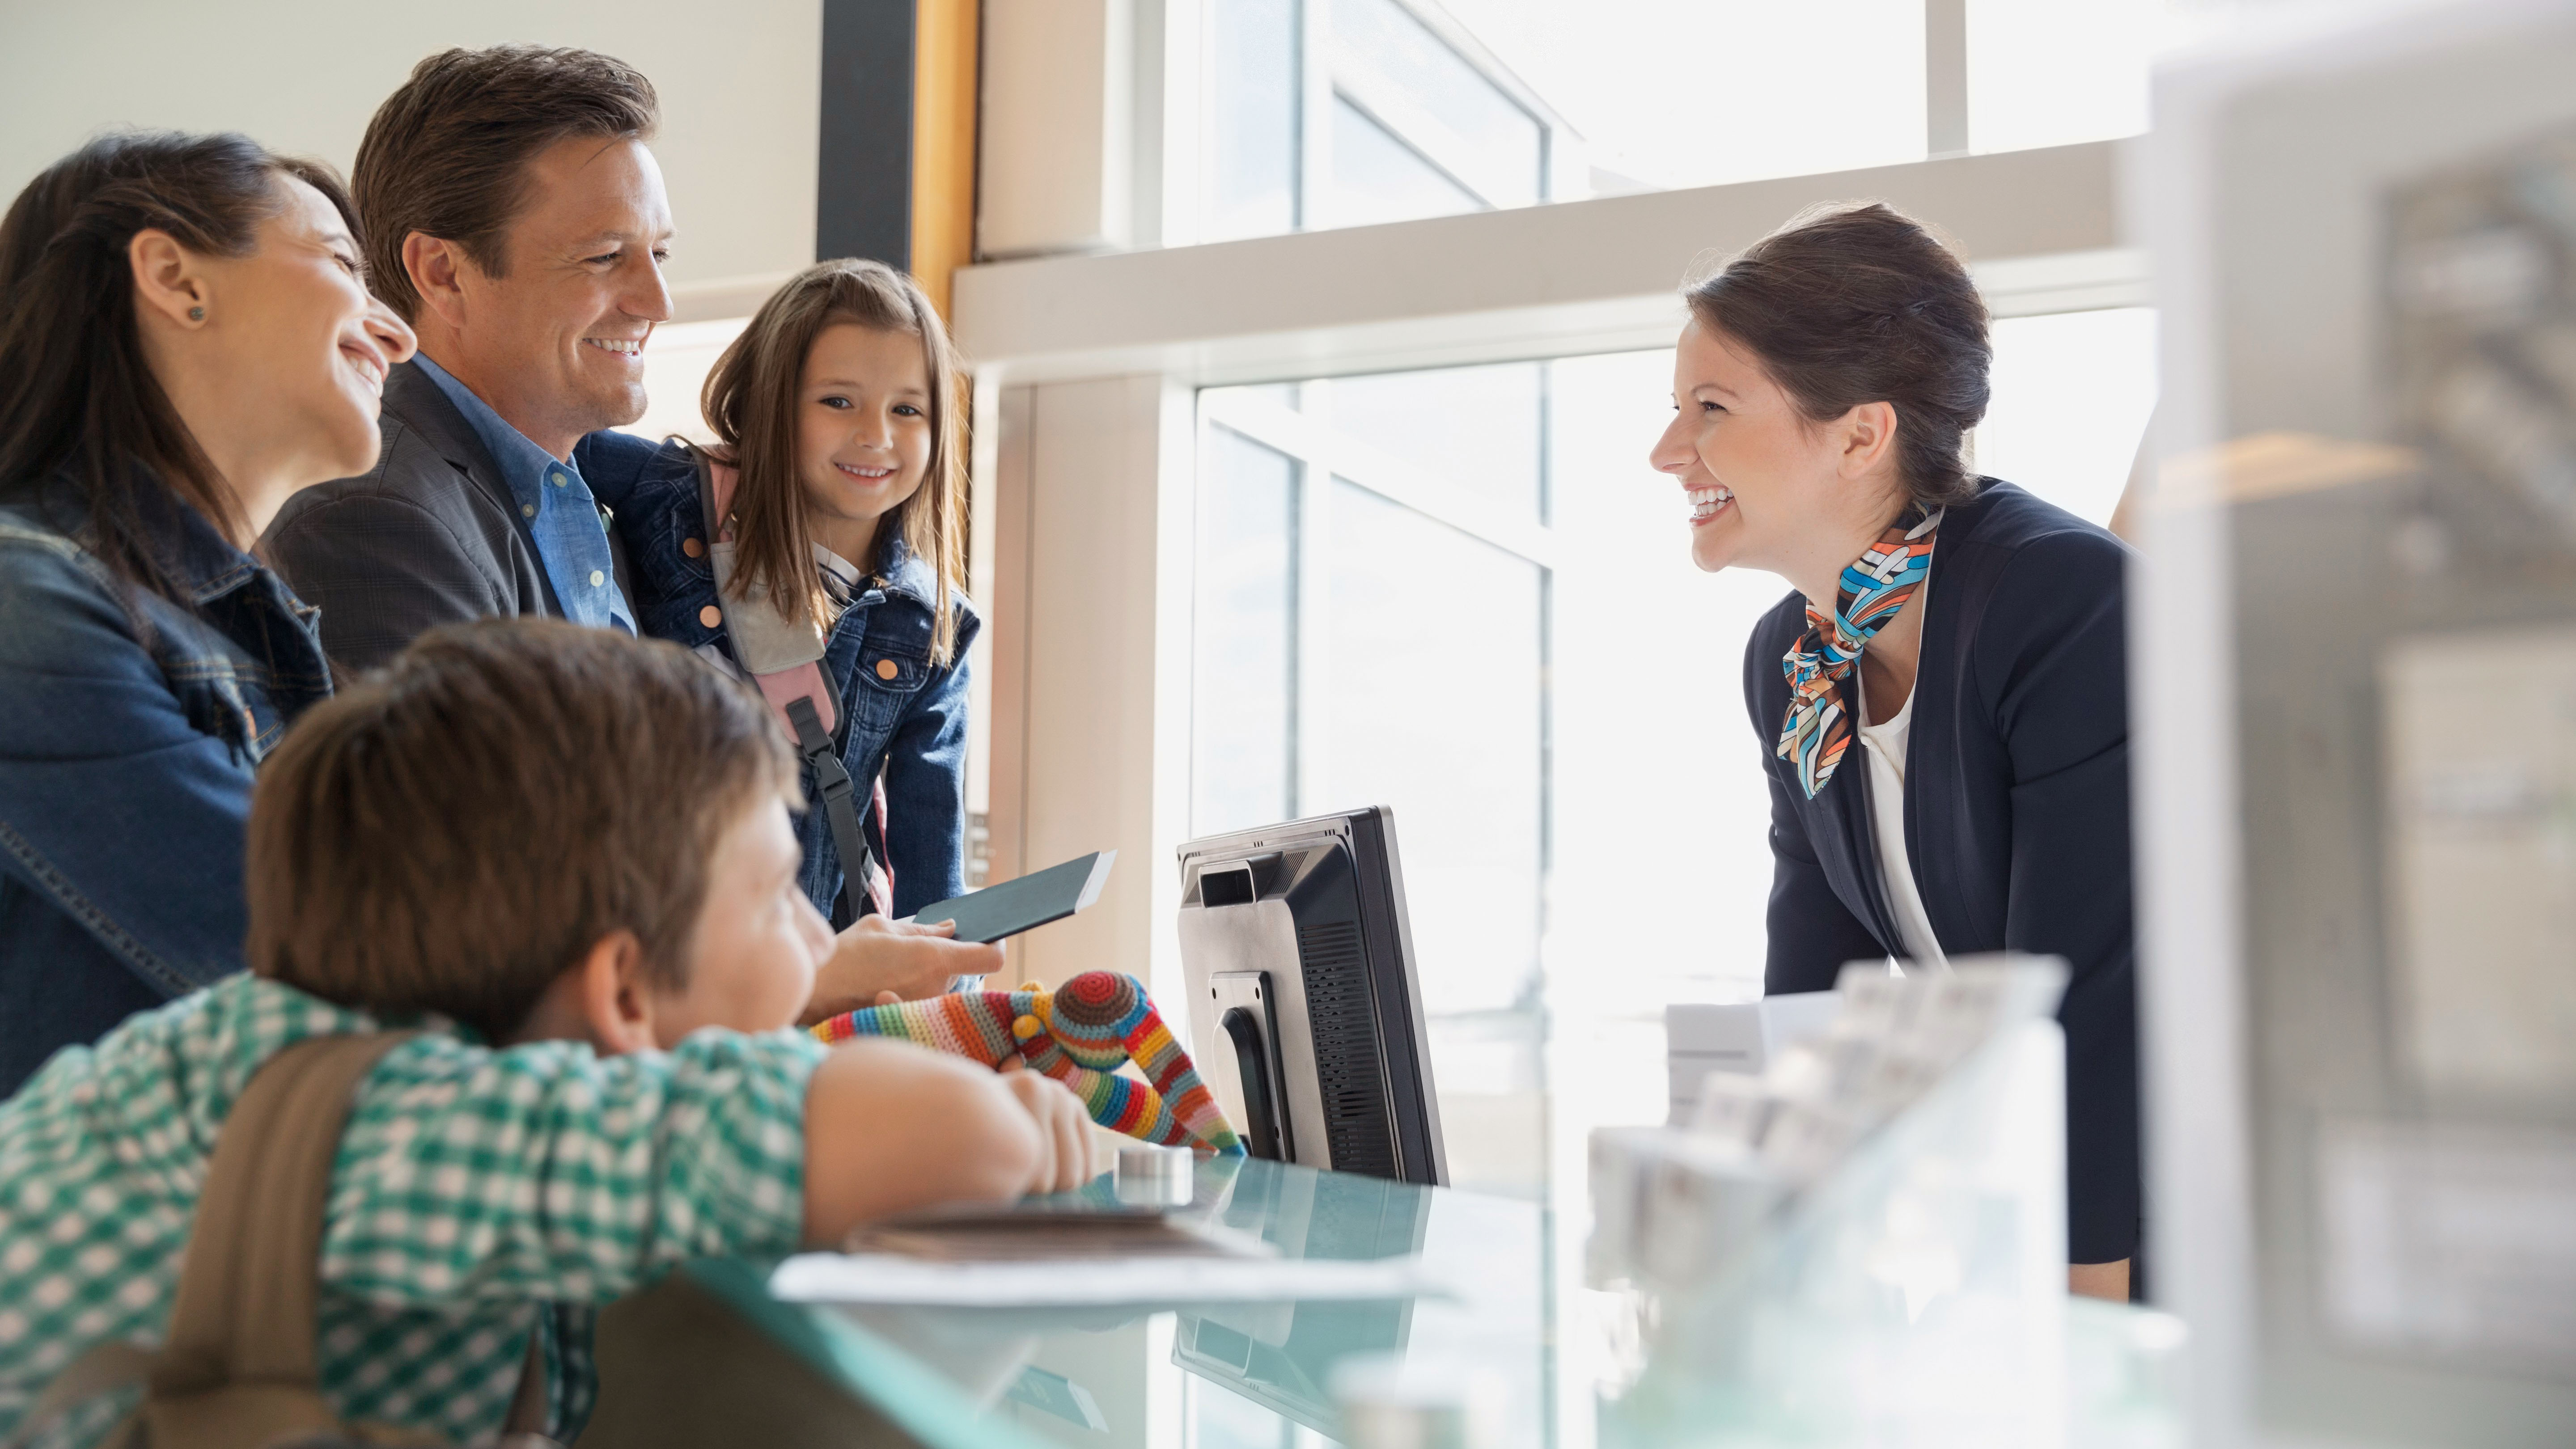 A family chats with a front desk clerk